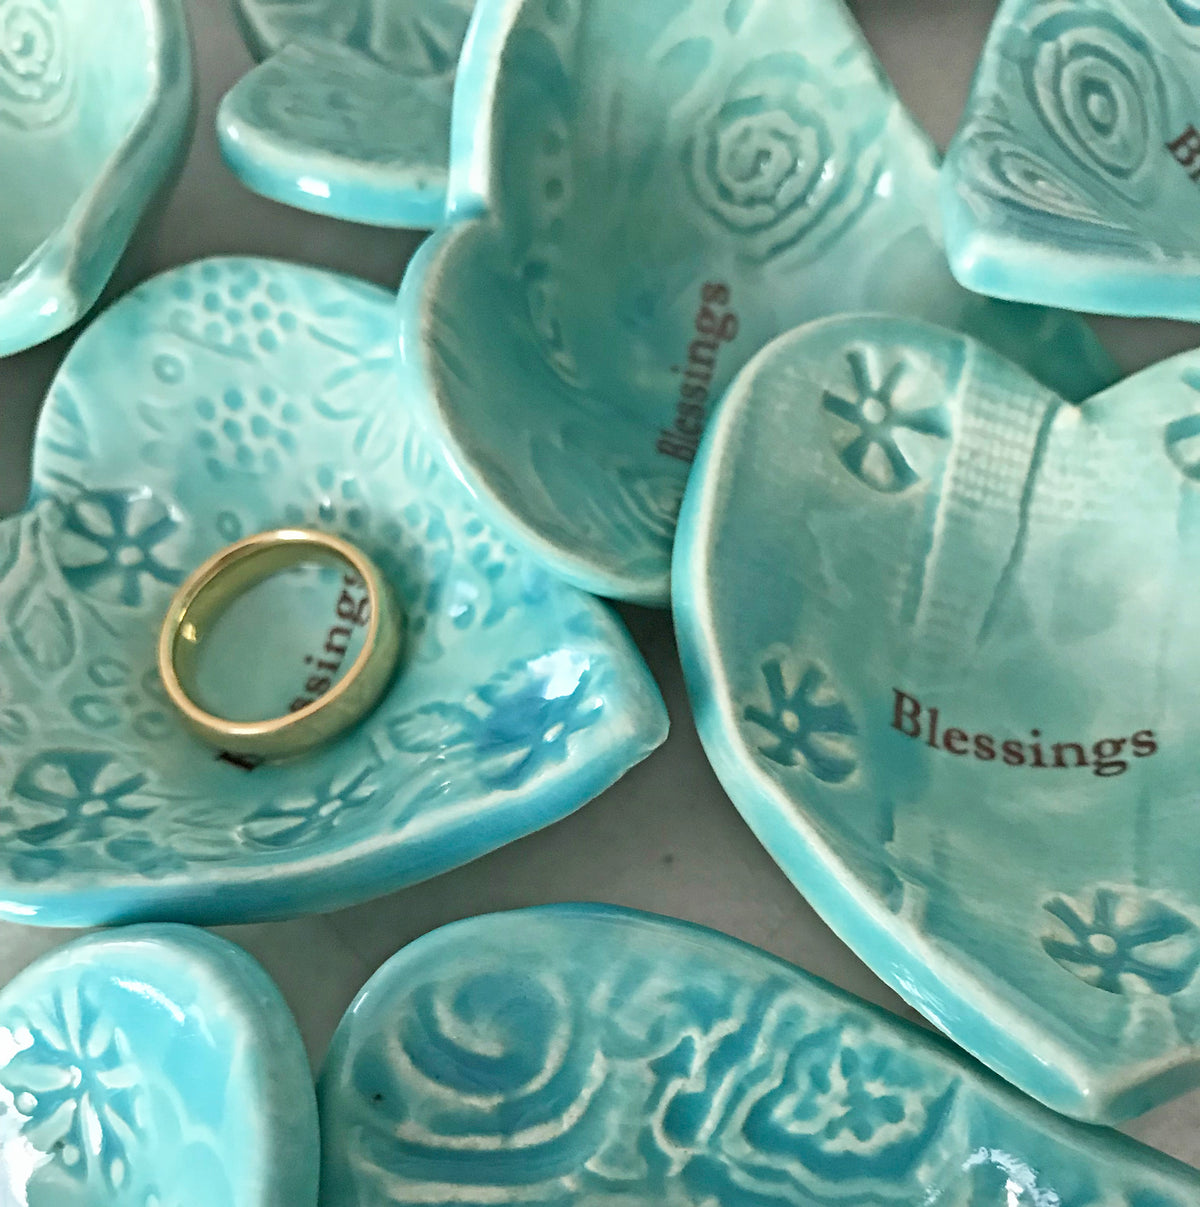 Giving Heart with the word &quot;Blessings&quot; is a unique and heartfelt gift .  Comes with its own gift bag and story card.